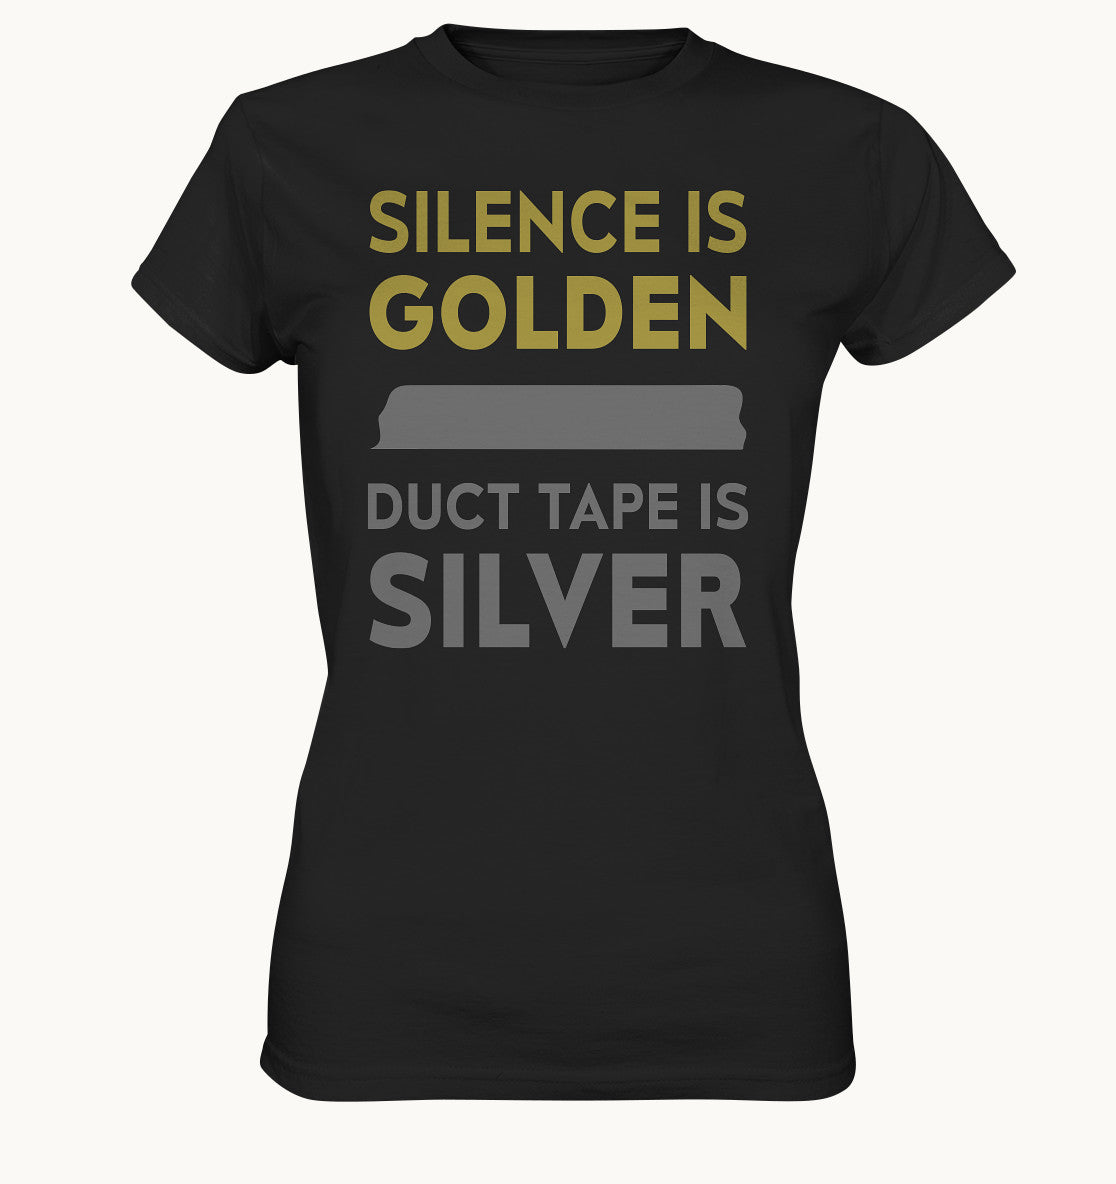 Silence is golden, duct tape is silver - Ladies Premium Shirt